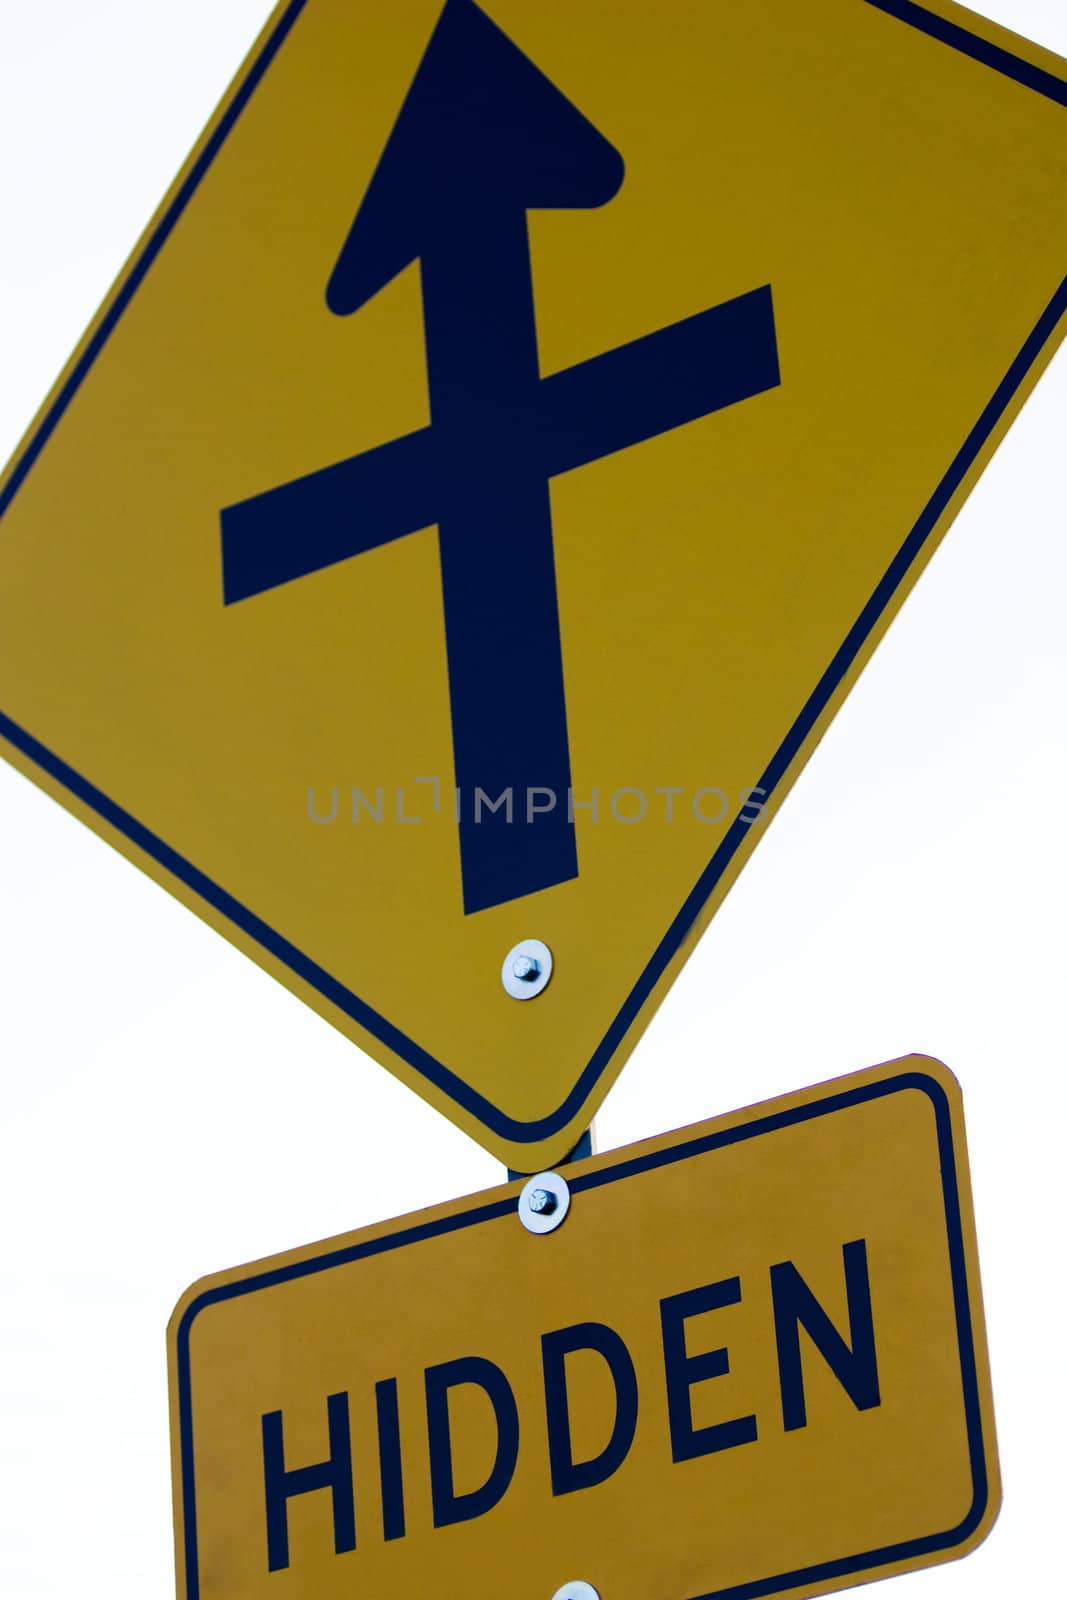 Closeup of a yellow road sign indicating a hidden road ahead, isolated on white.